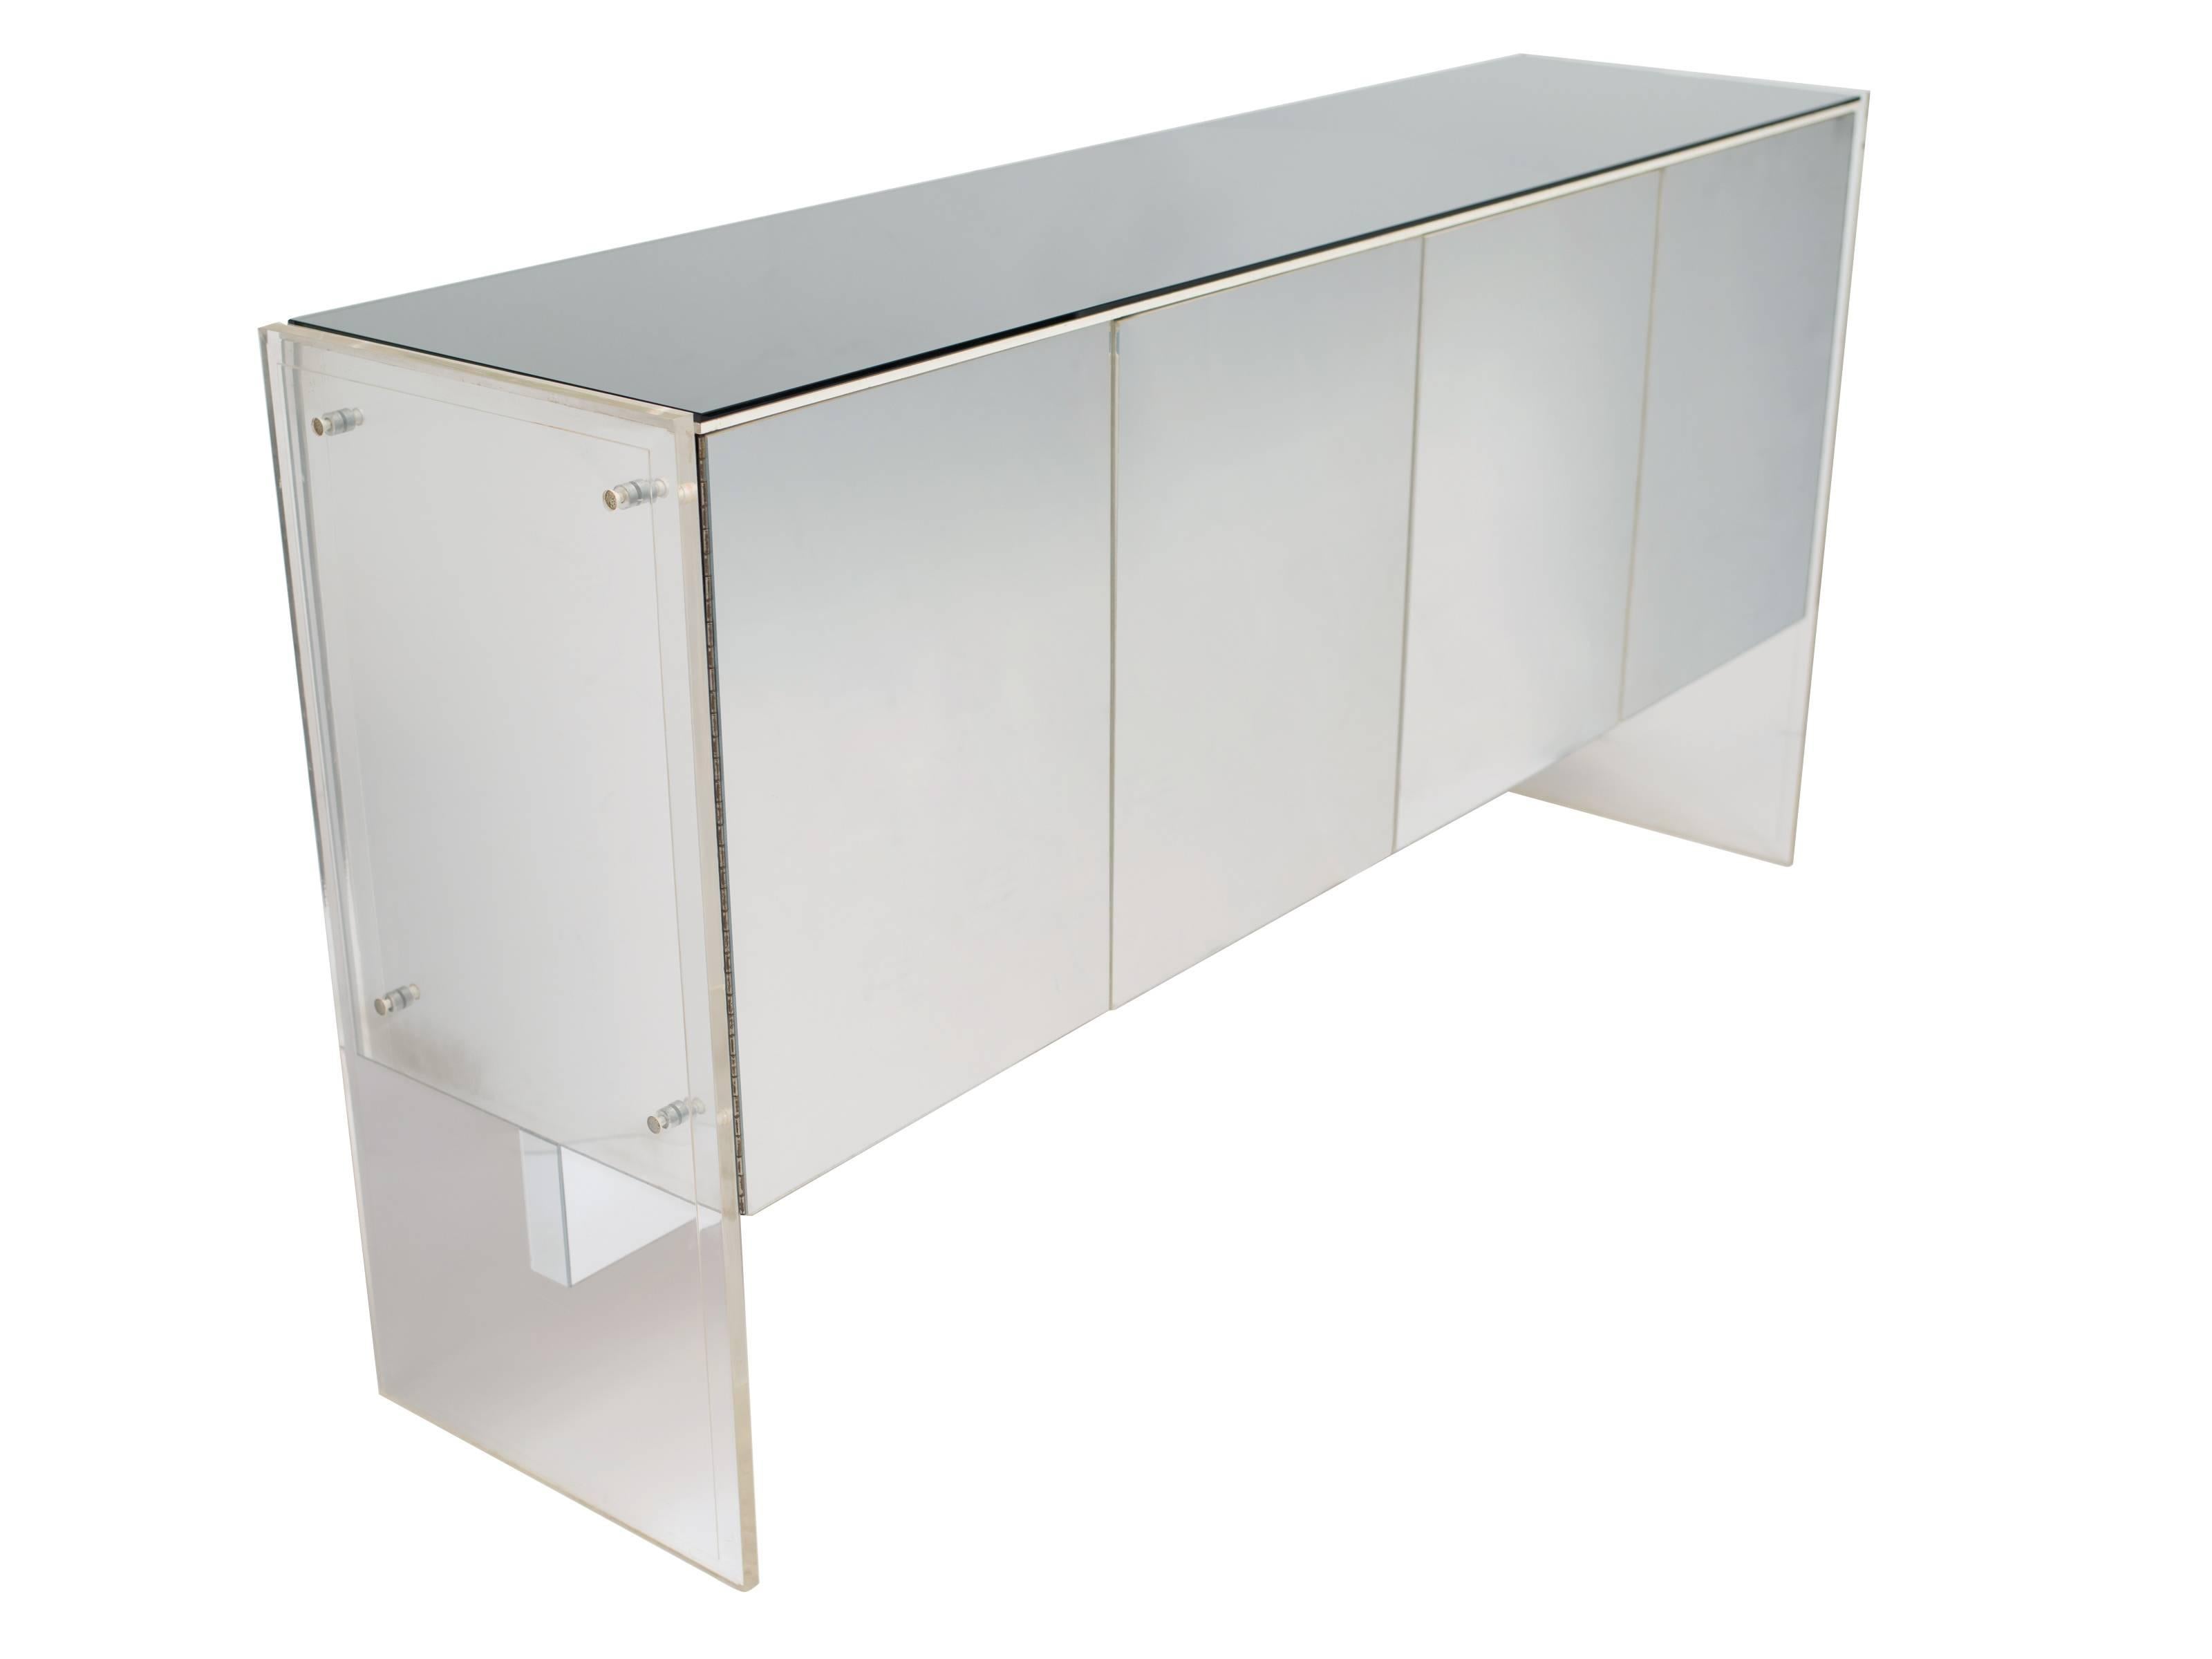 Modernist sideboard in Lucite and glass. The credenza is comprised of four reflective metal door fronts and thick Lucite sides/frame with stylized bolts. Fitted with a beautiful smoked mirrored top. The doors open to reveal interior cabinet and